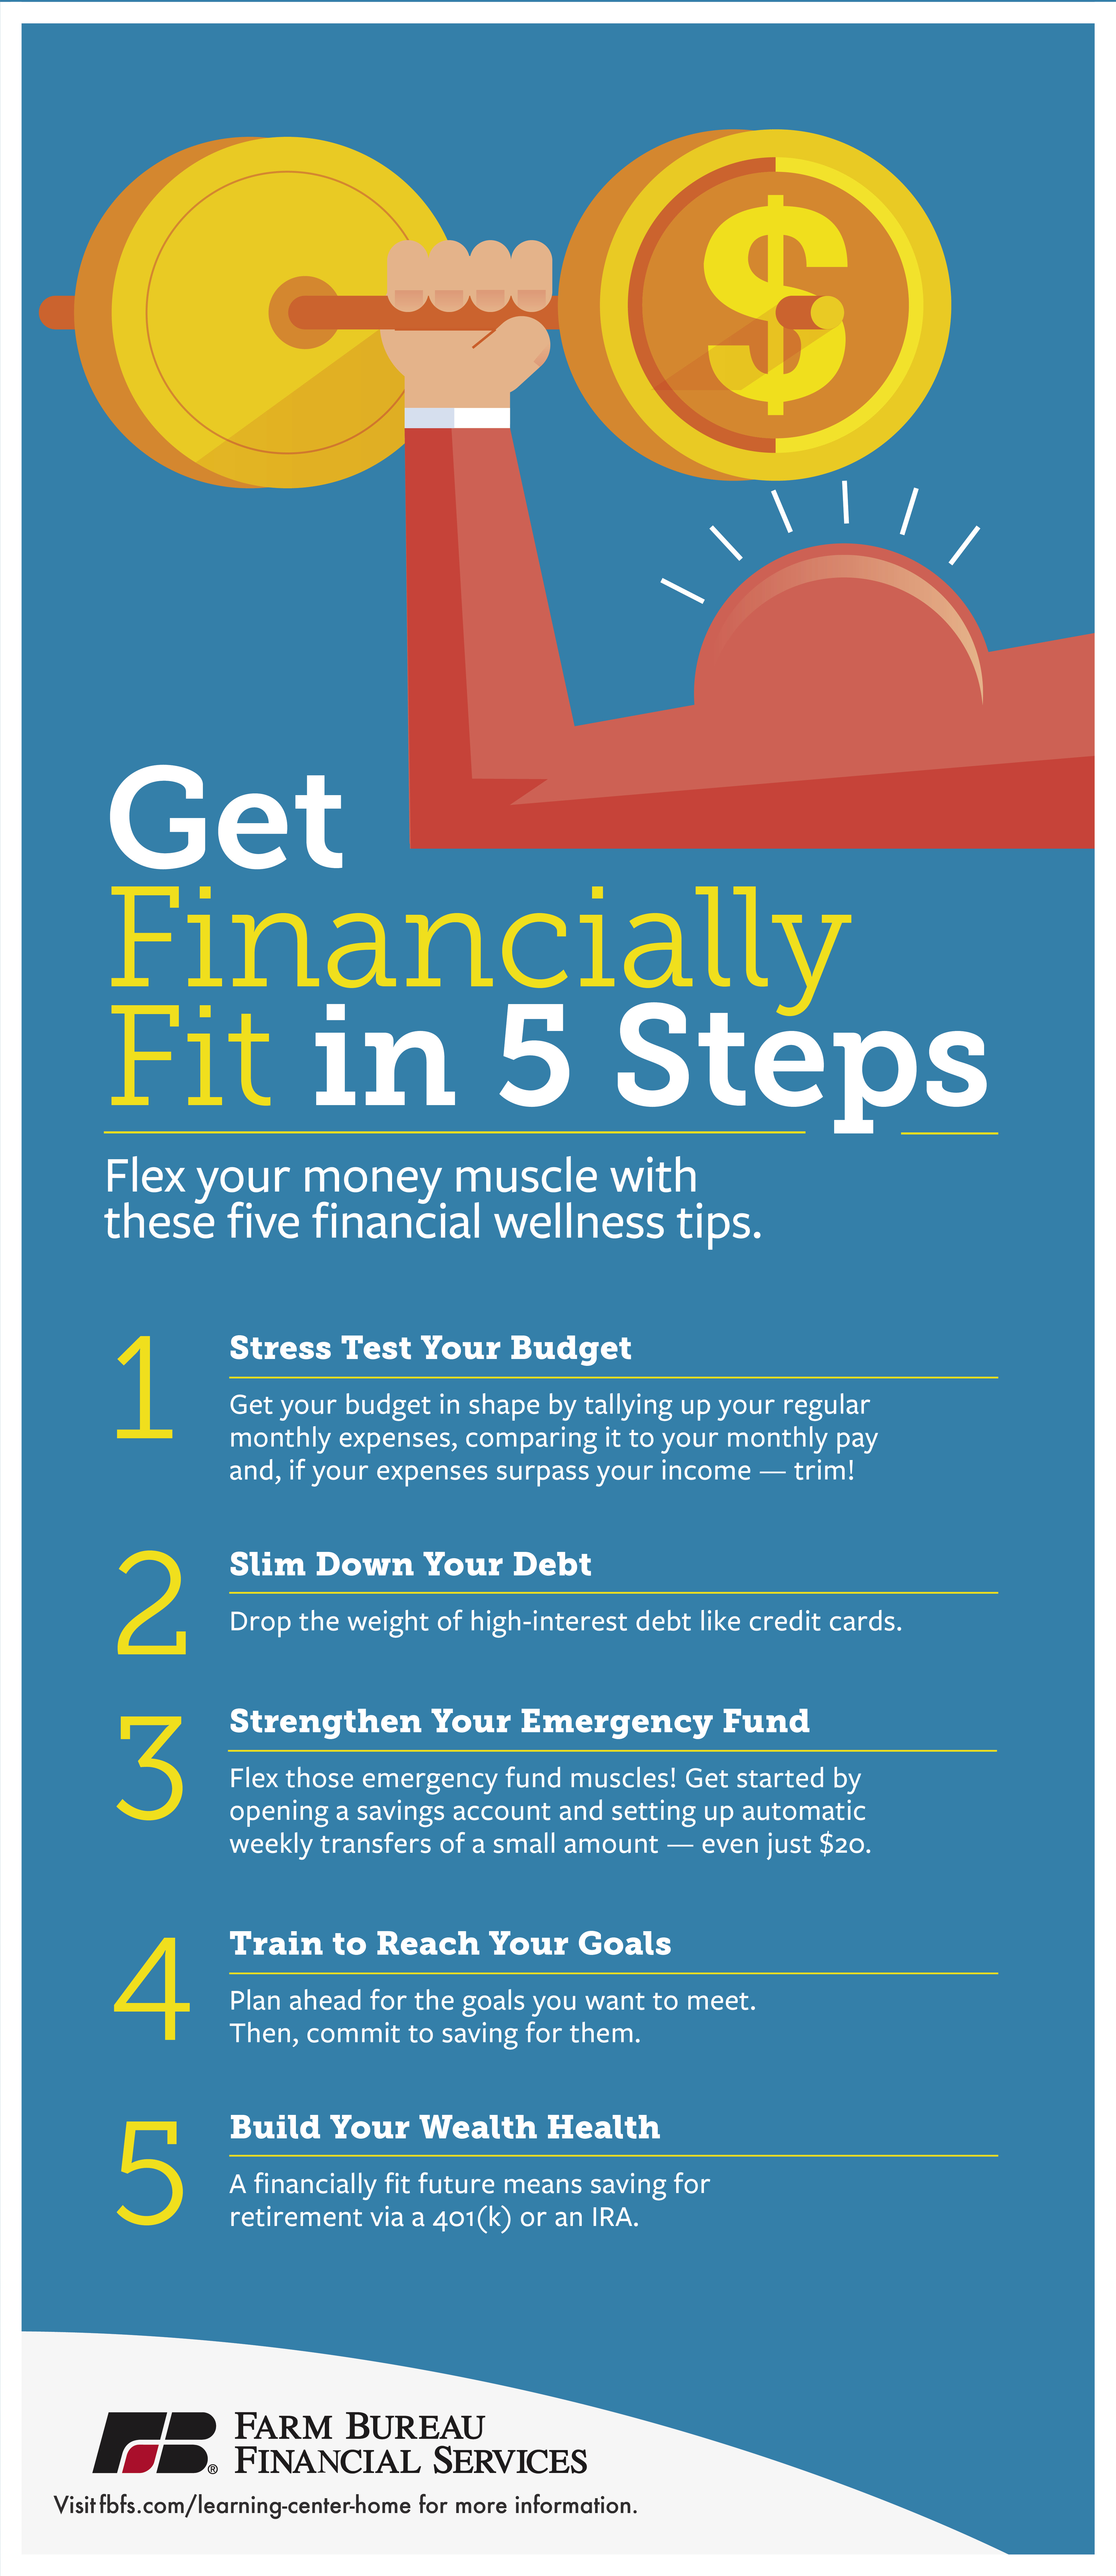 Get Financially Fit in 5 Steps